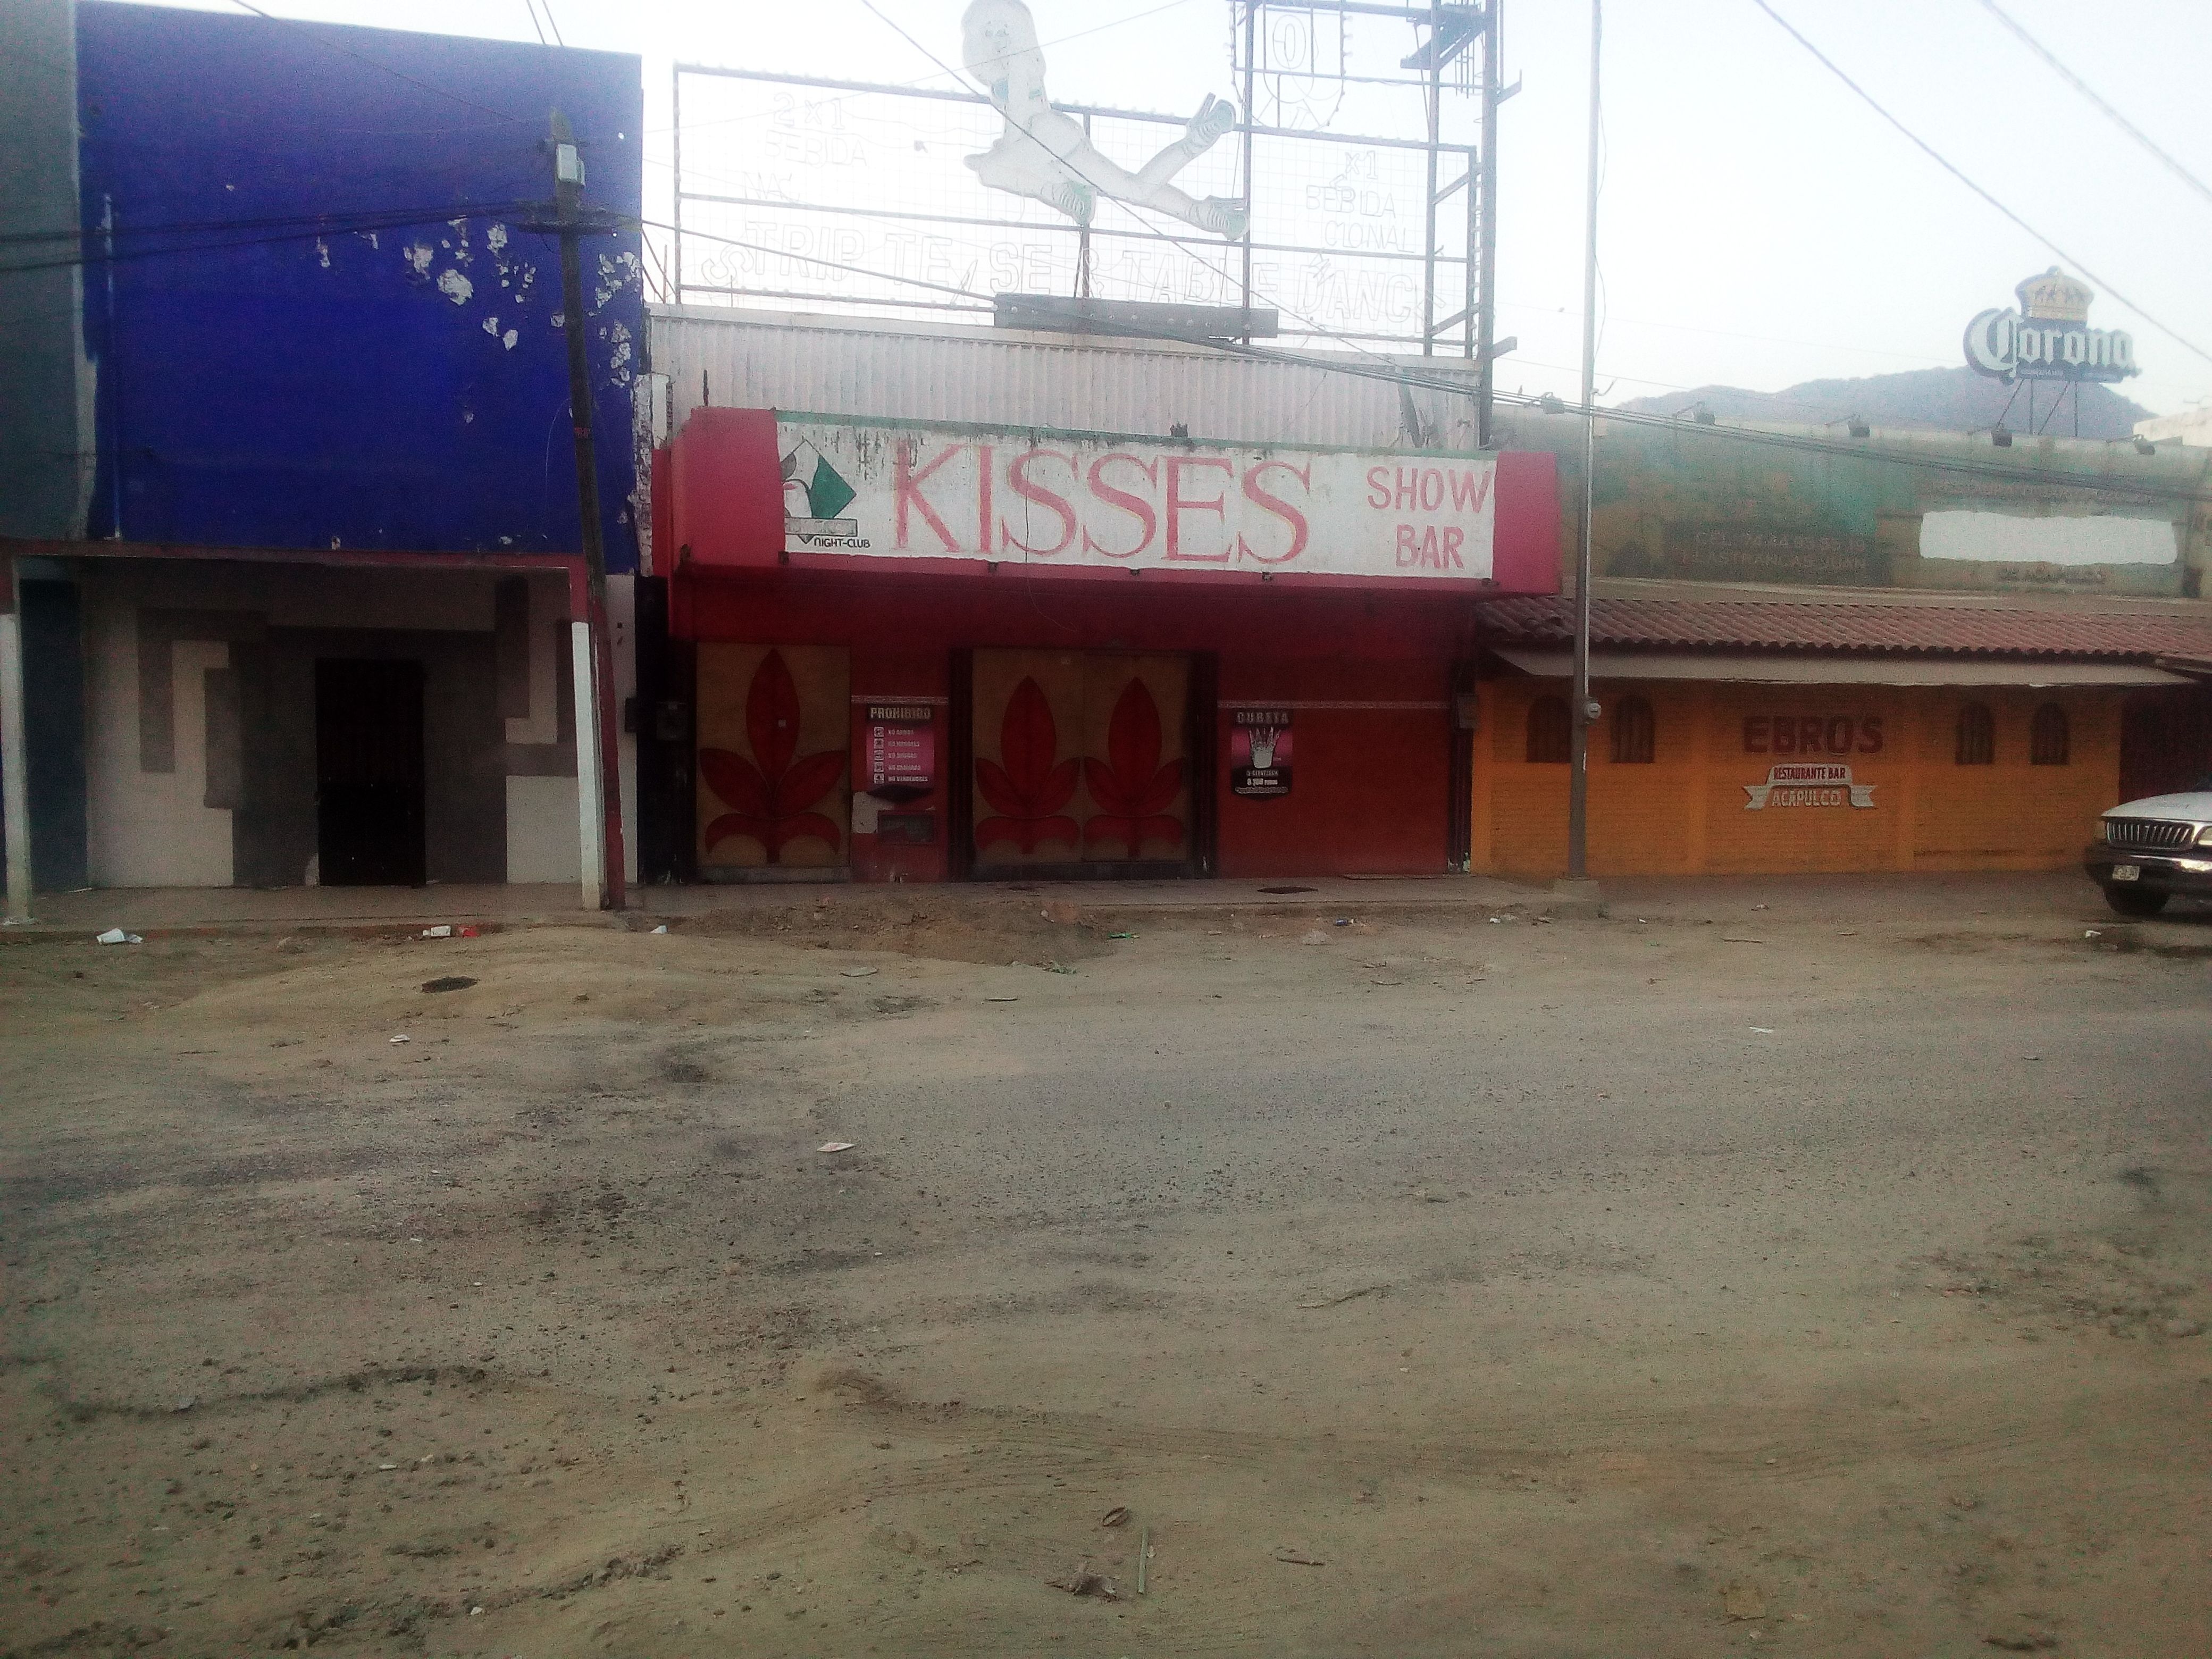 IMG_20180310_182940 Kisses club (near party.original.dull, unzips.inches.smaller) Acapulco.jpg